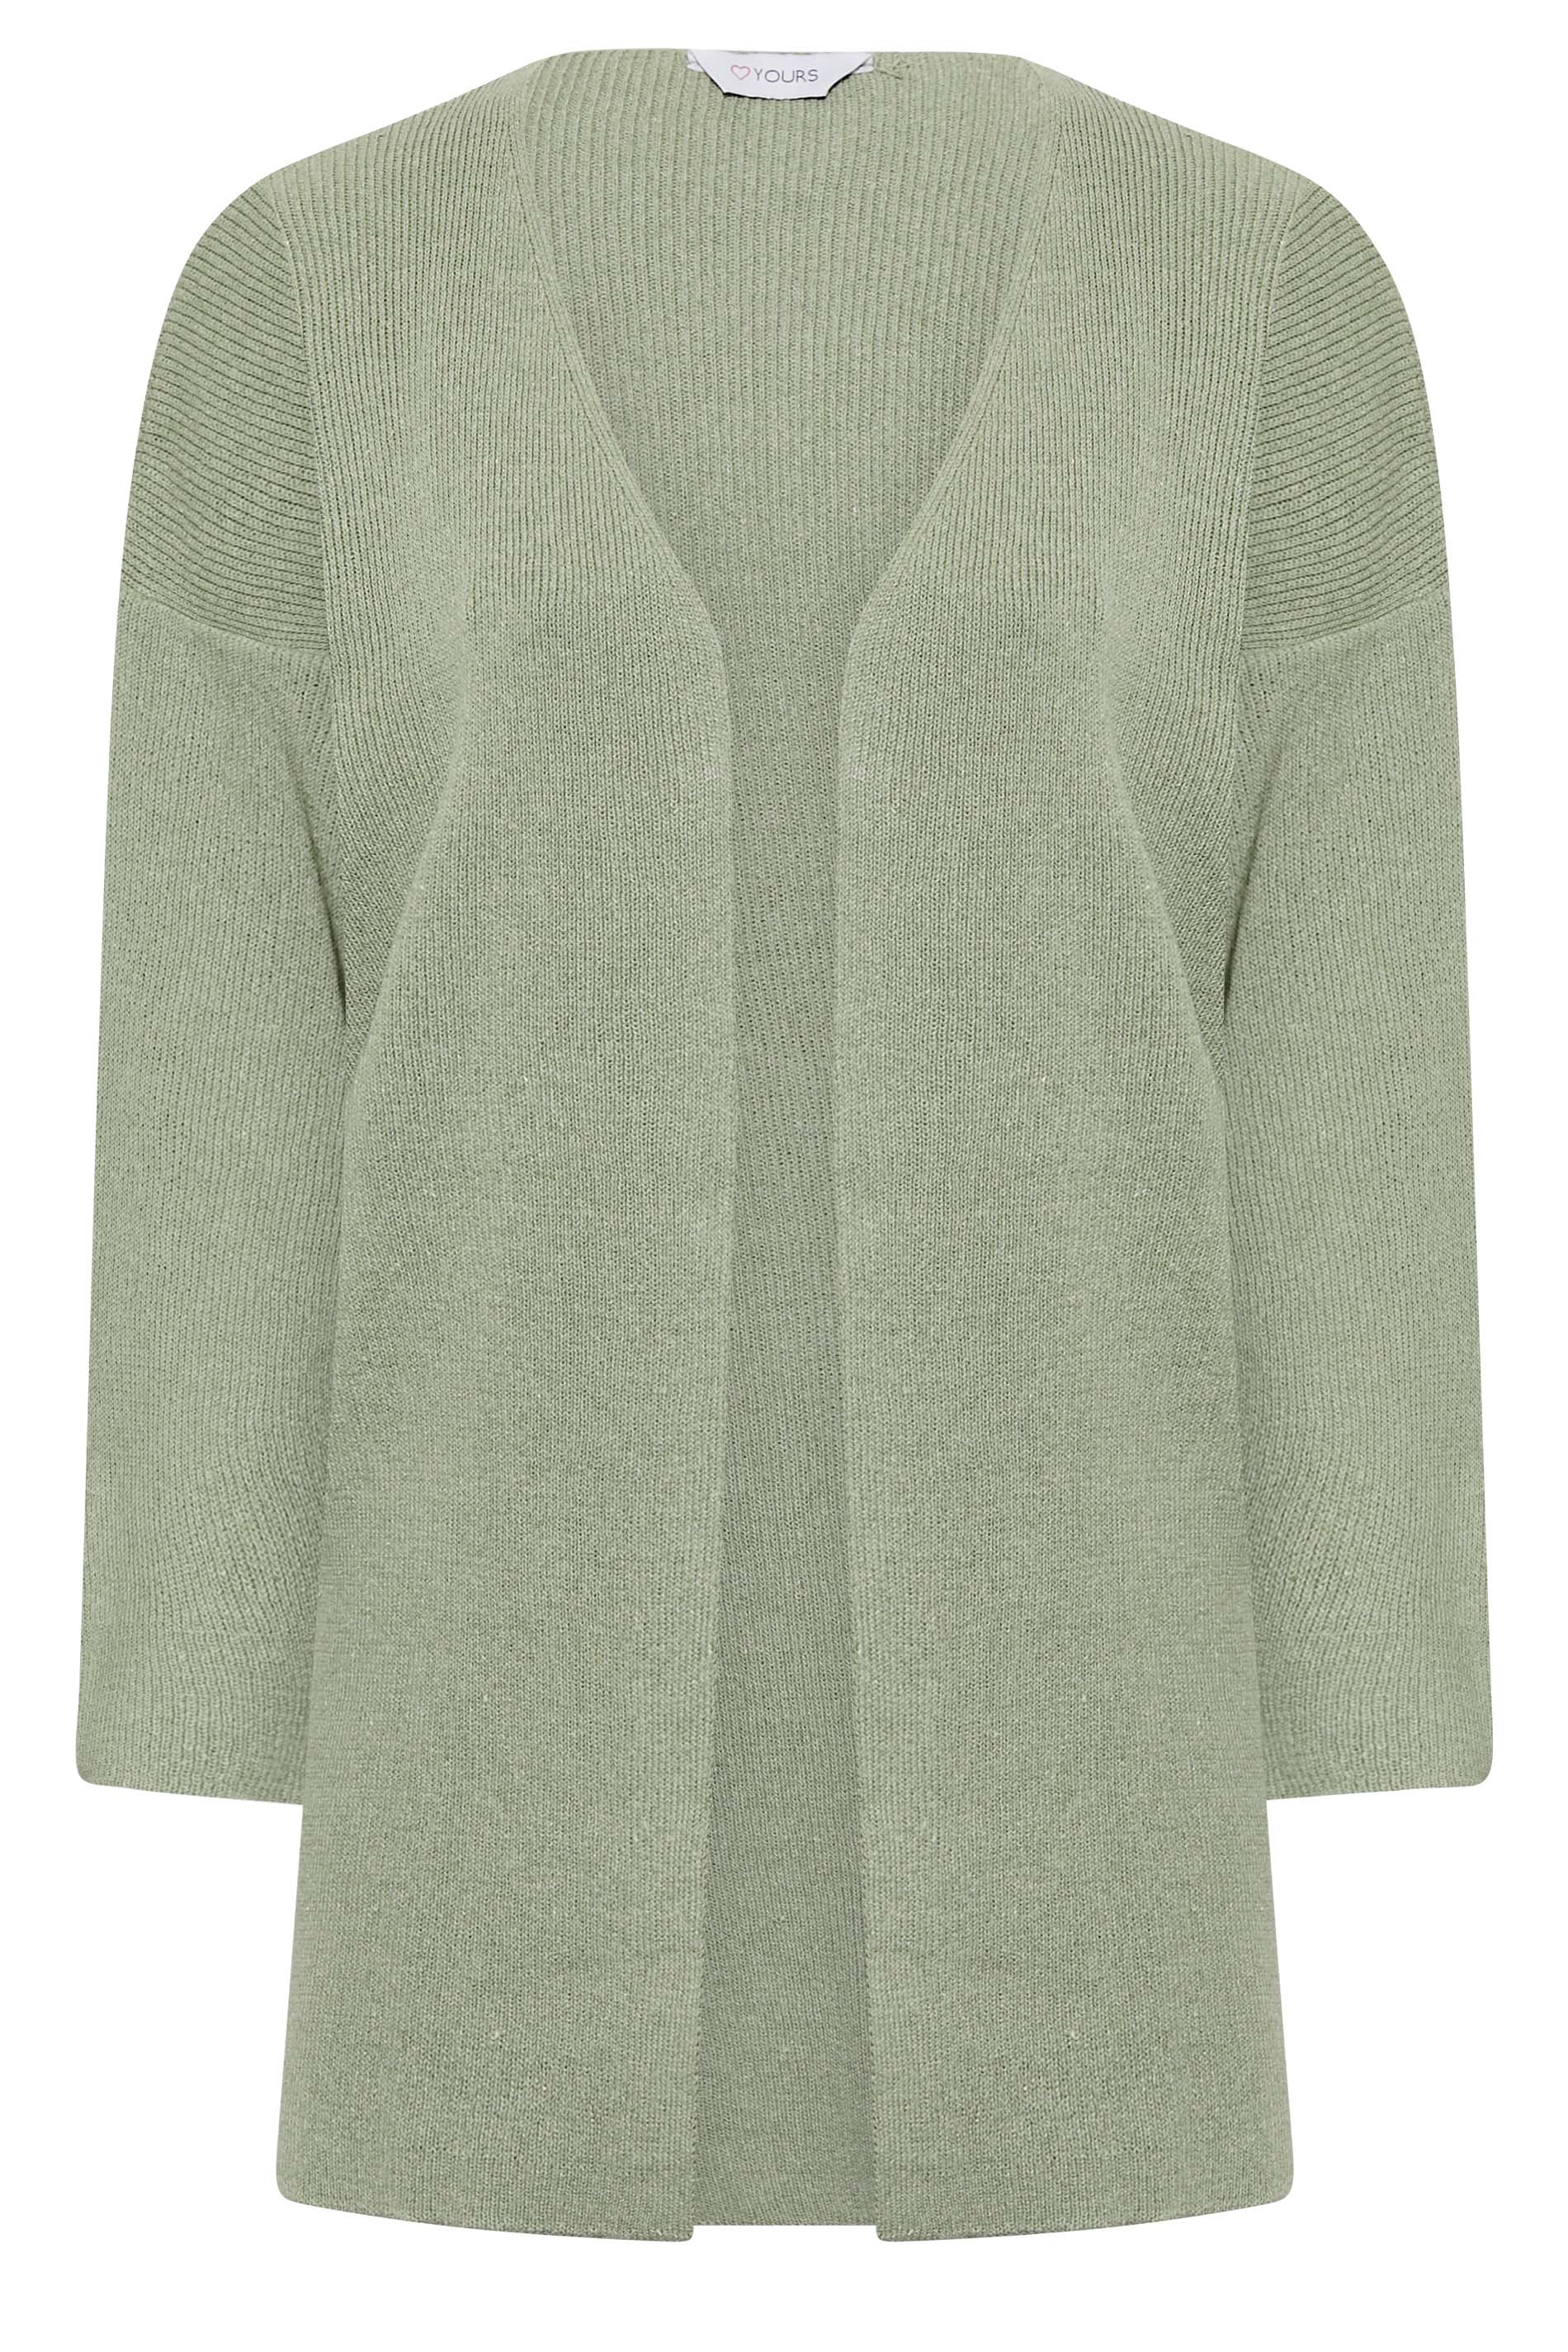 Plus Size Sage Green Knitted Cardigan | Yours Clothing